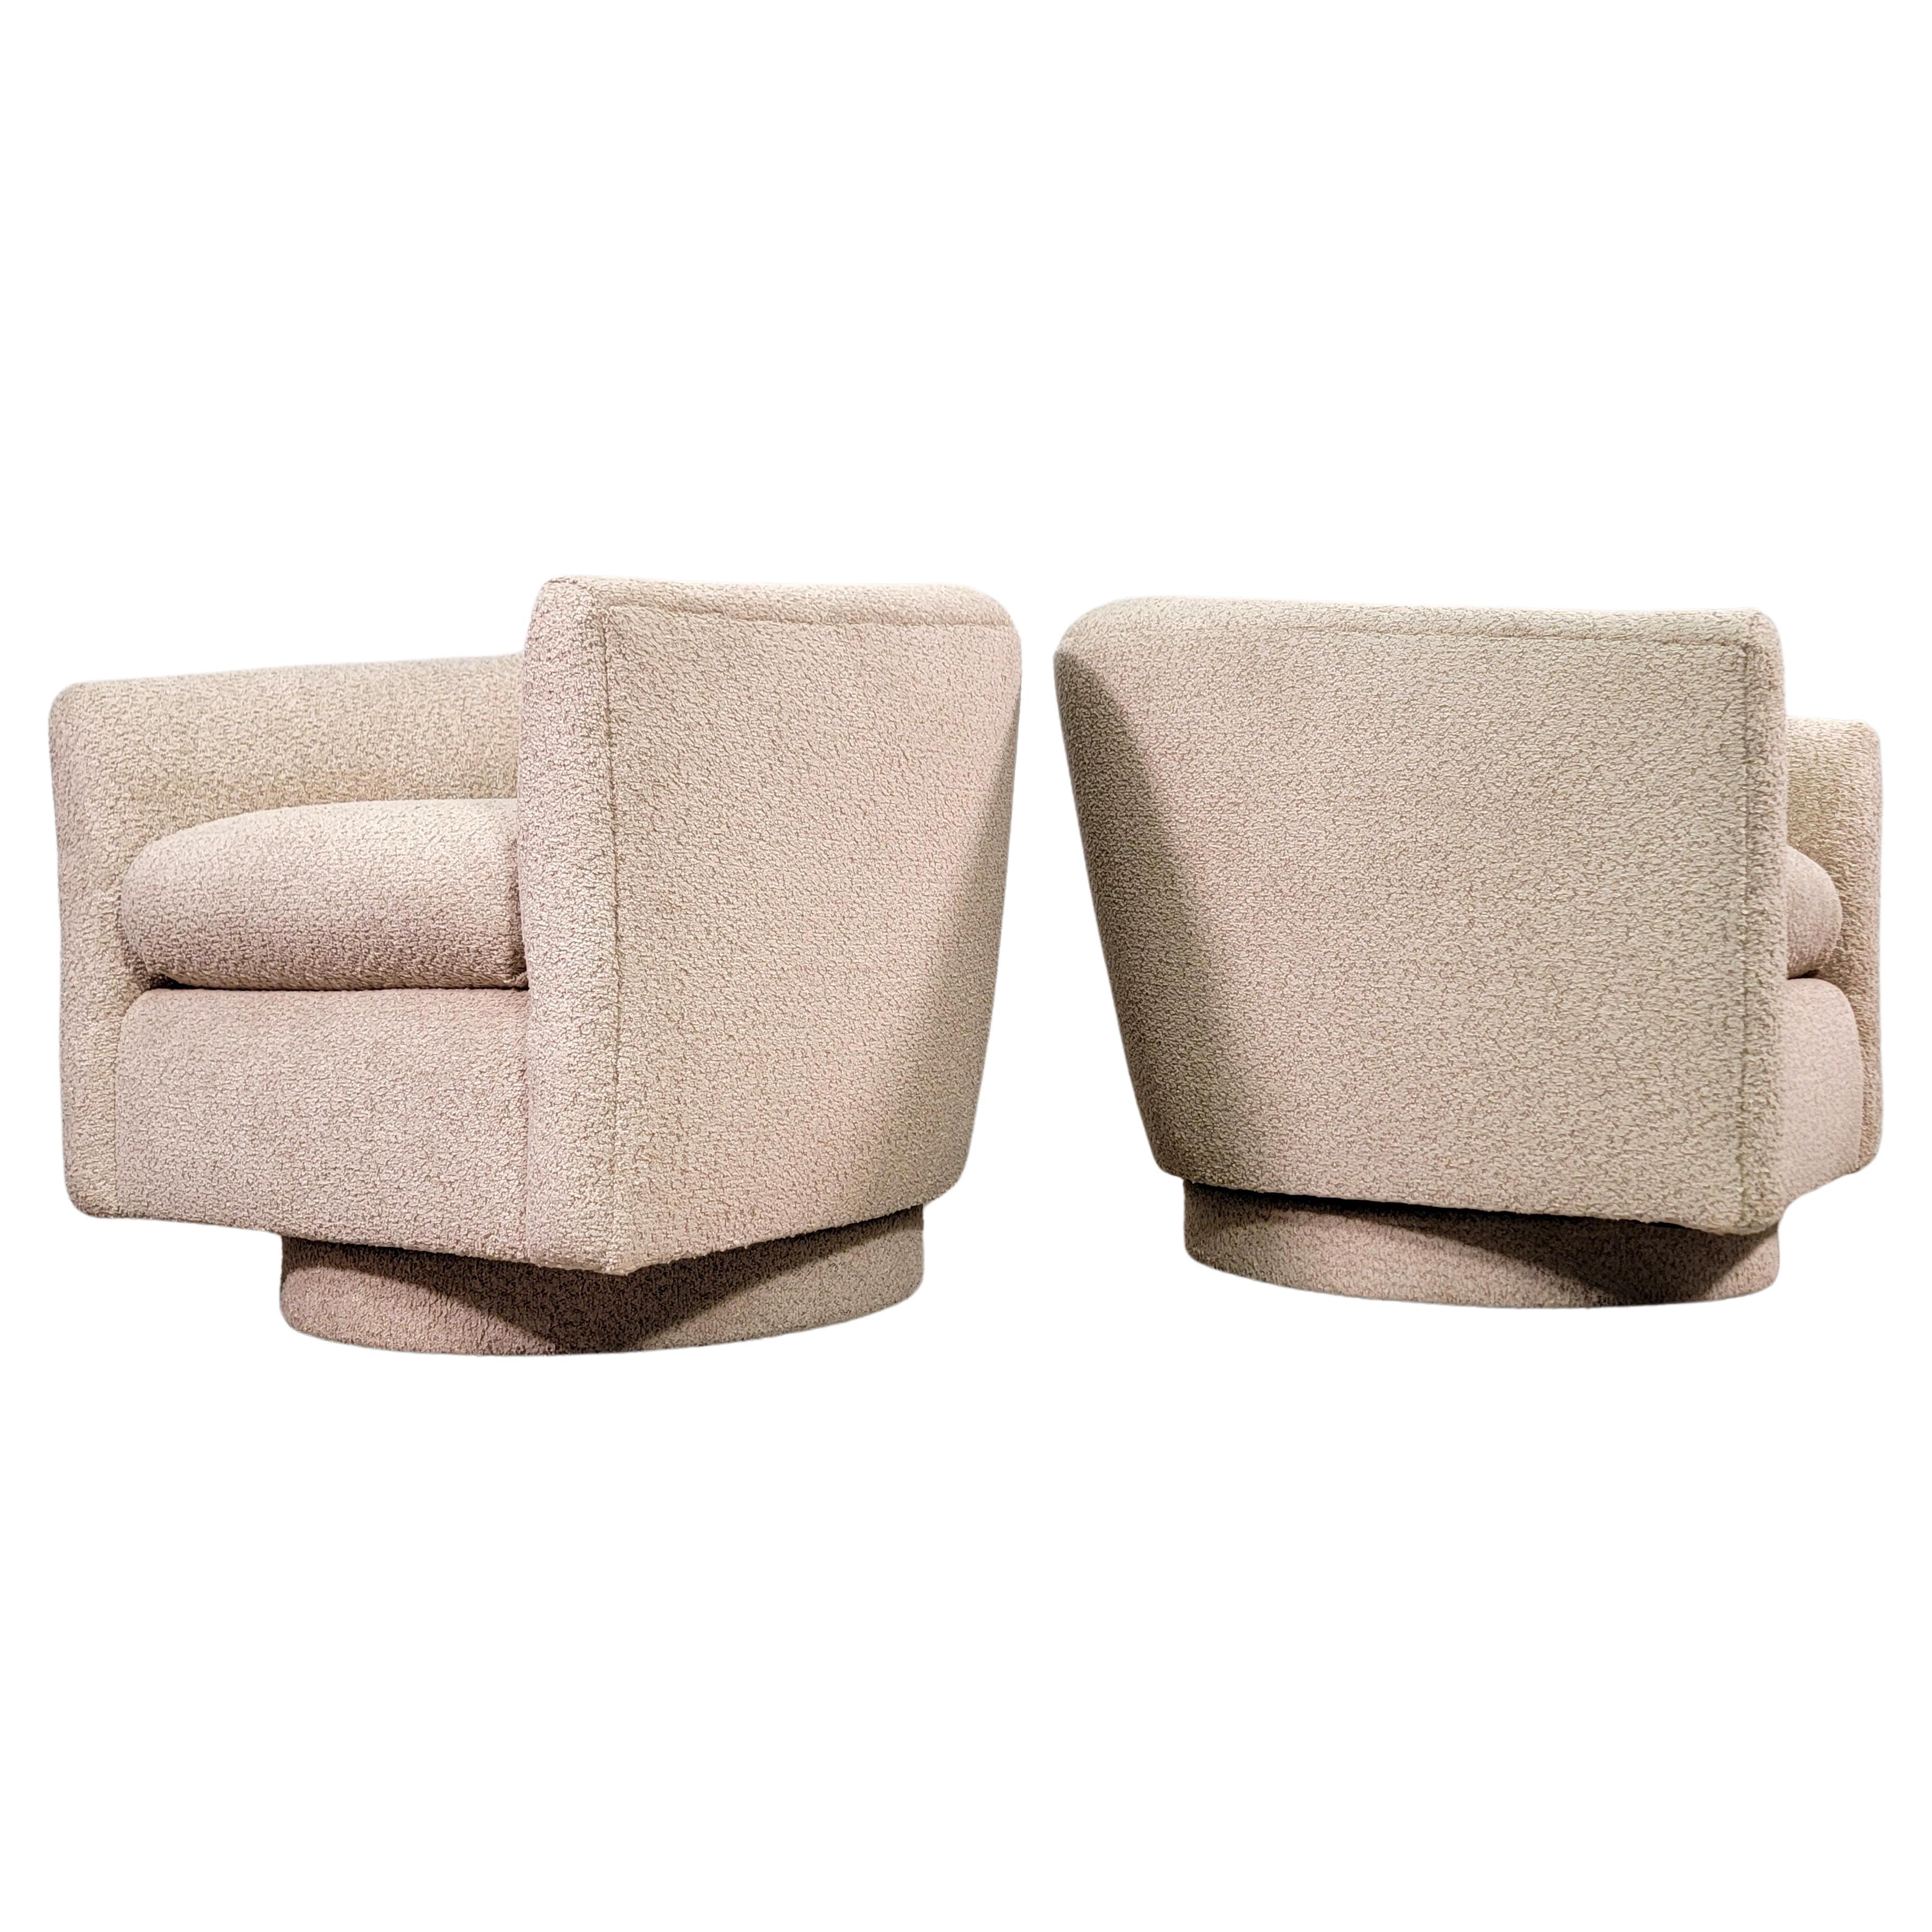 Fabric Swivel Chairs in Bouclé in the Style of Milo Baughman, 1970s For Sale